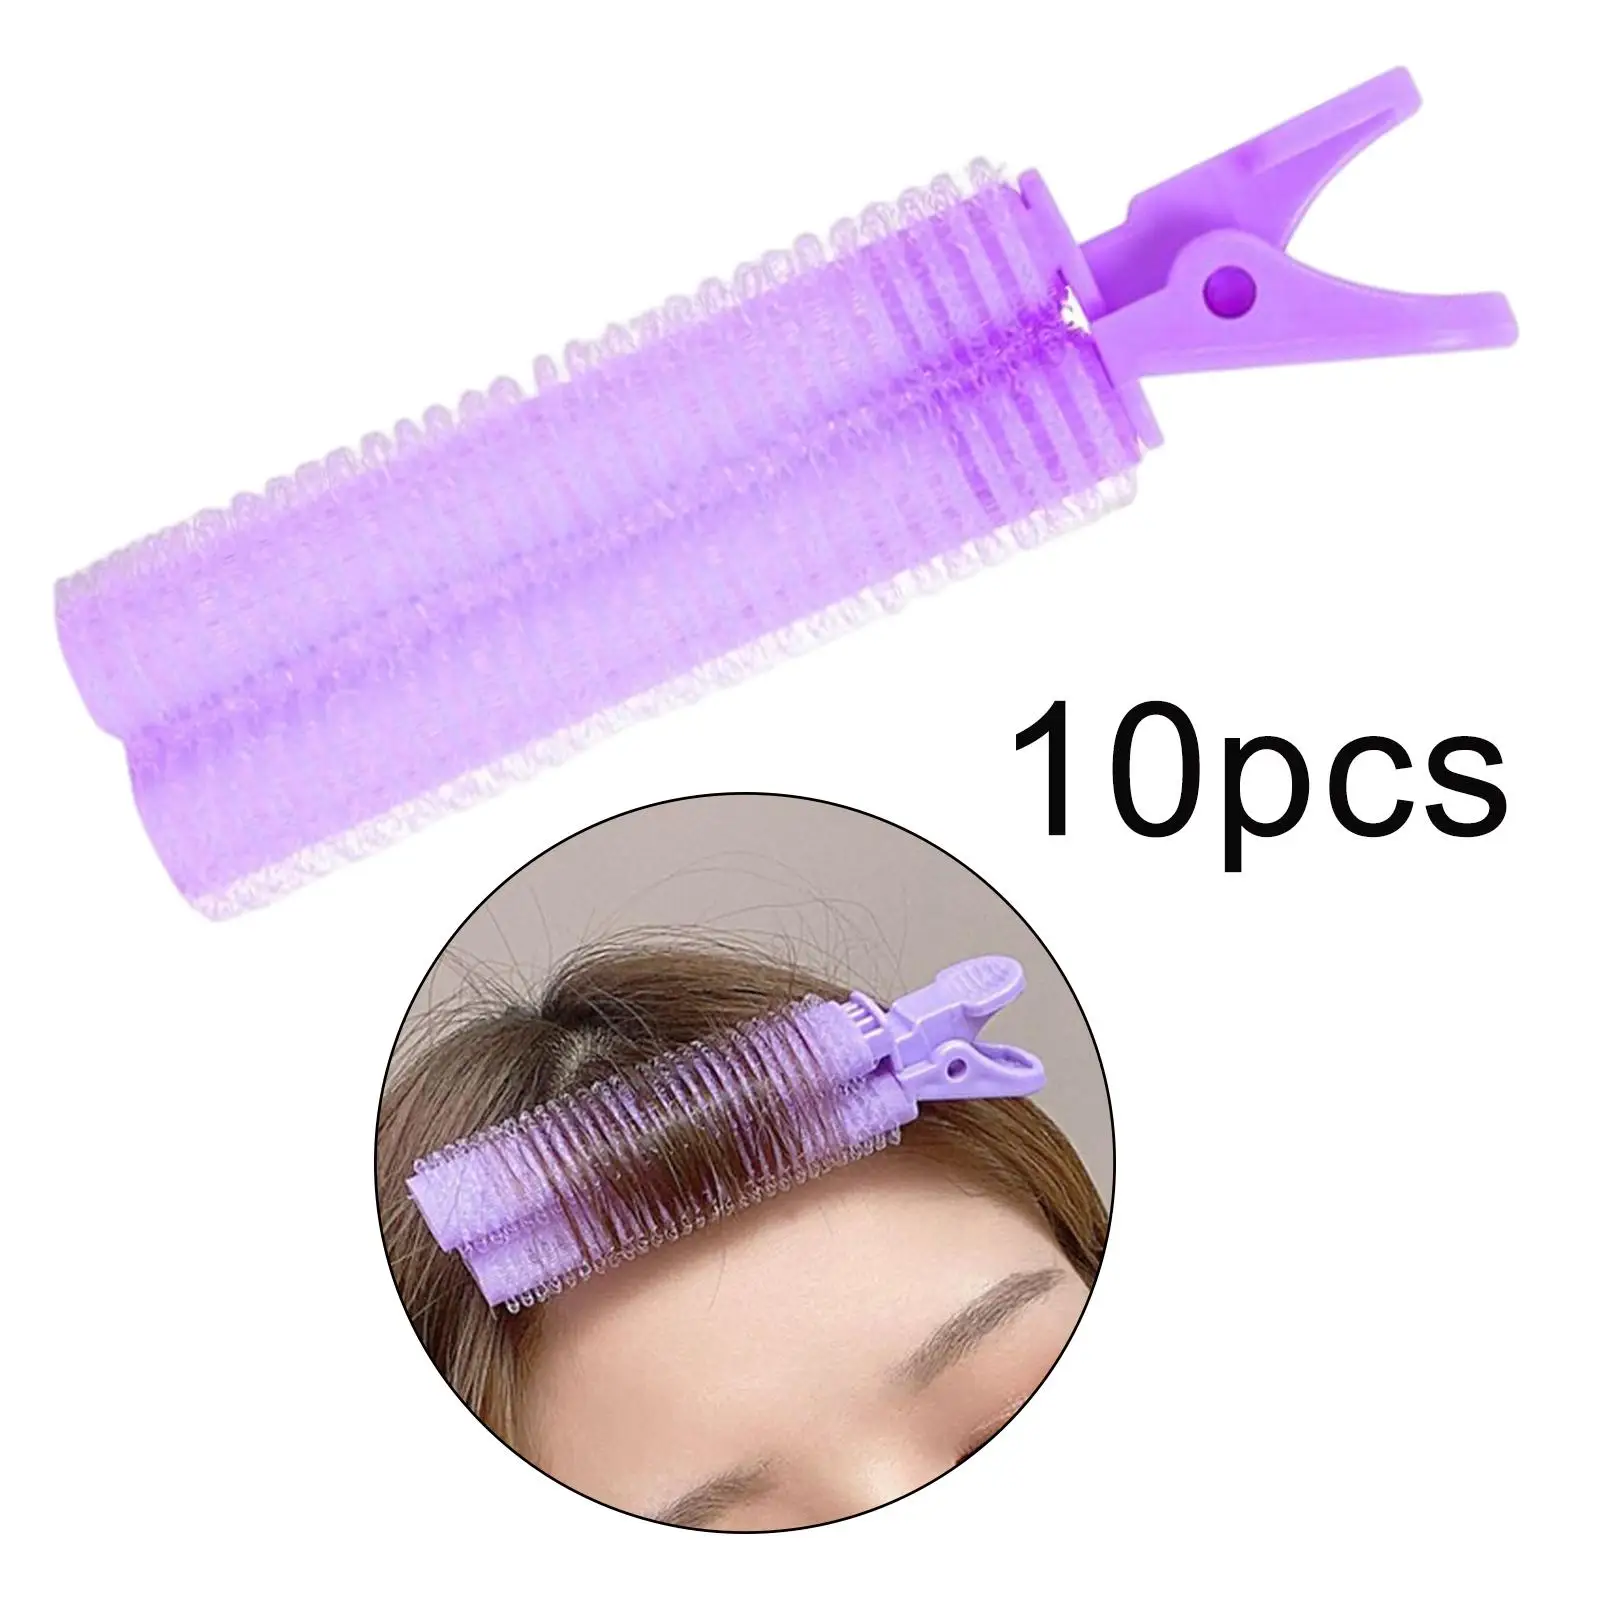 10 Pieces Hair Bangs Curling Clips Washable Durable Hair Top Barrel Reusable Hair Bangs Roller for DIY Hair Styling Girls